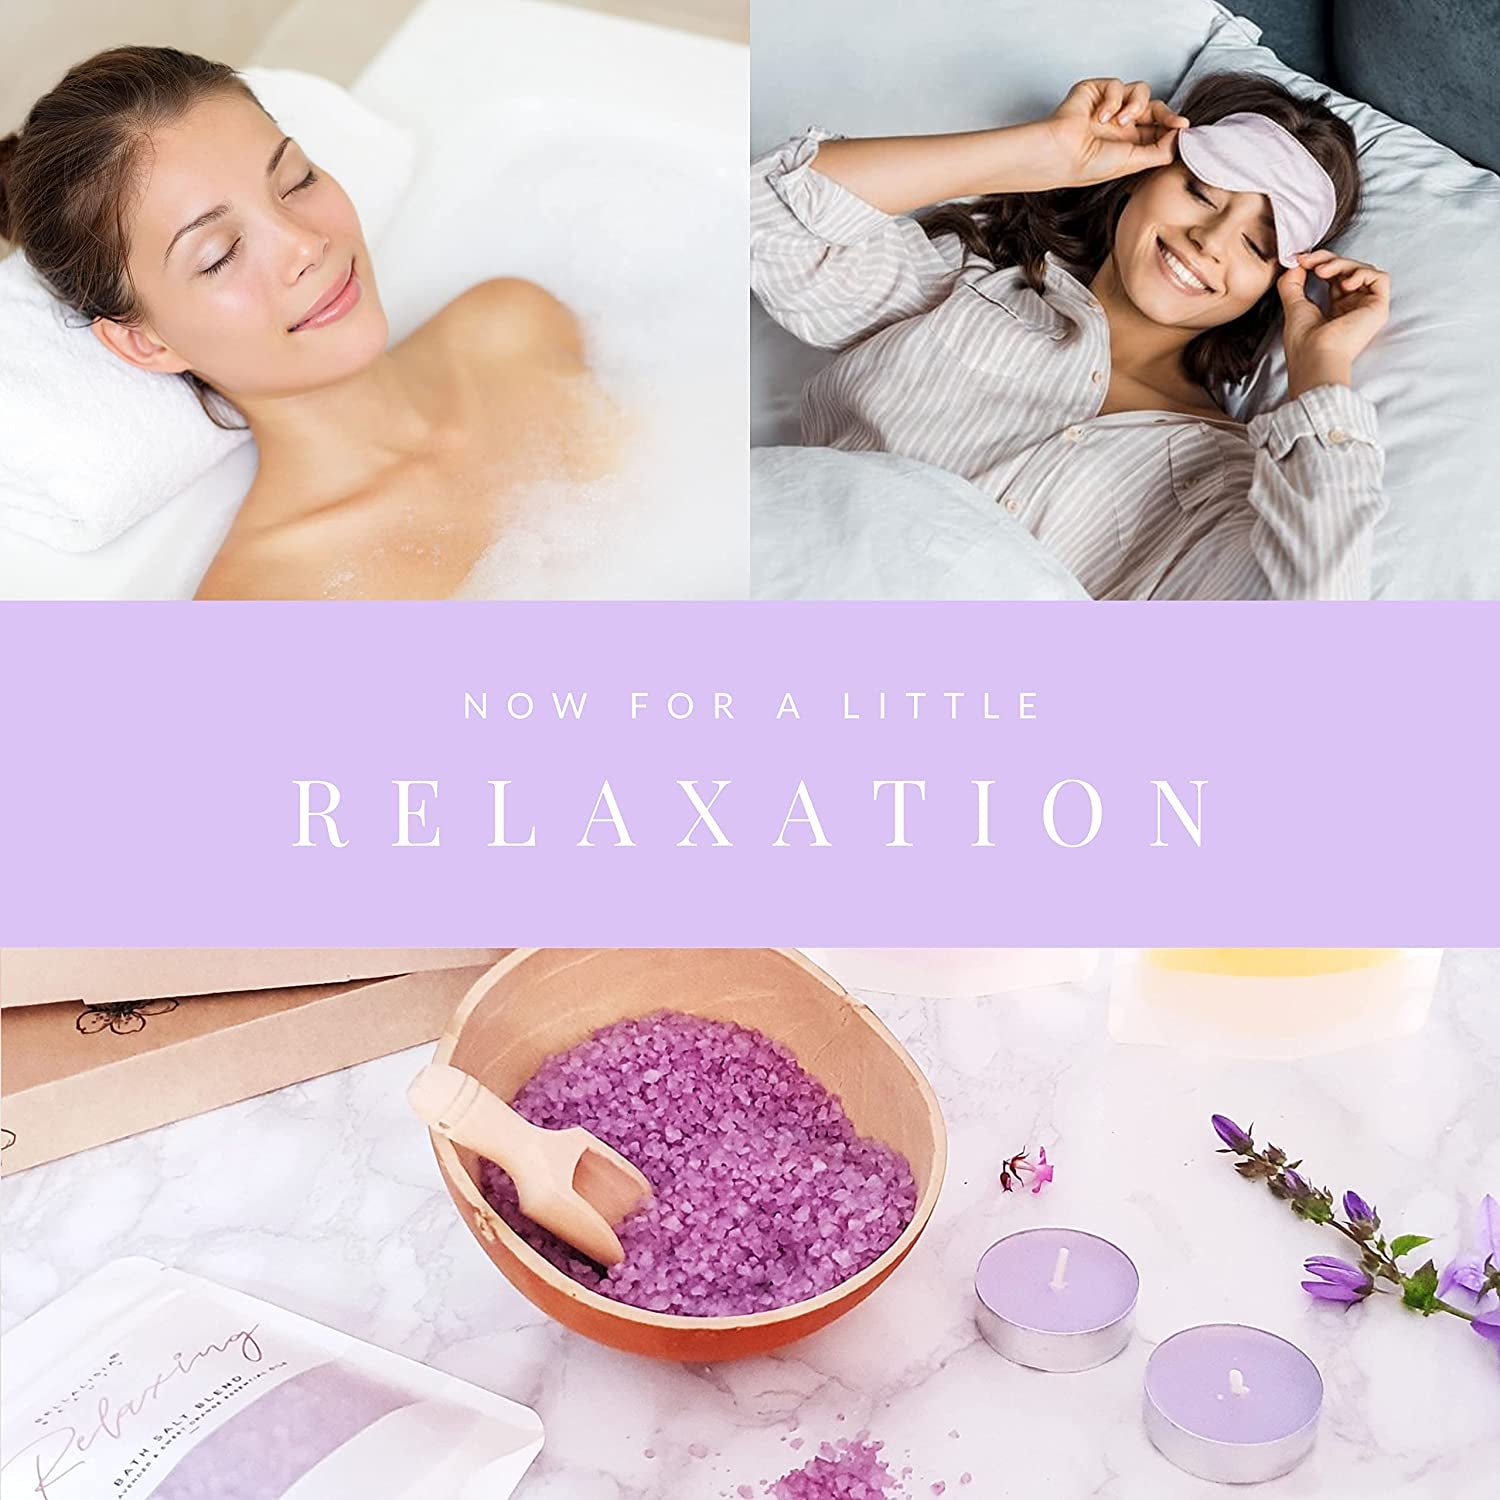 Relaxation Gifts for Women De Stress Self Care Pamper Hamper Kit, Hug in a Box Bath Presents Relaxing Mums Gift Set, Brilliant Christmas Gifts or Birthdays Gifts for Her to Relax and Enjoy